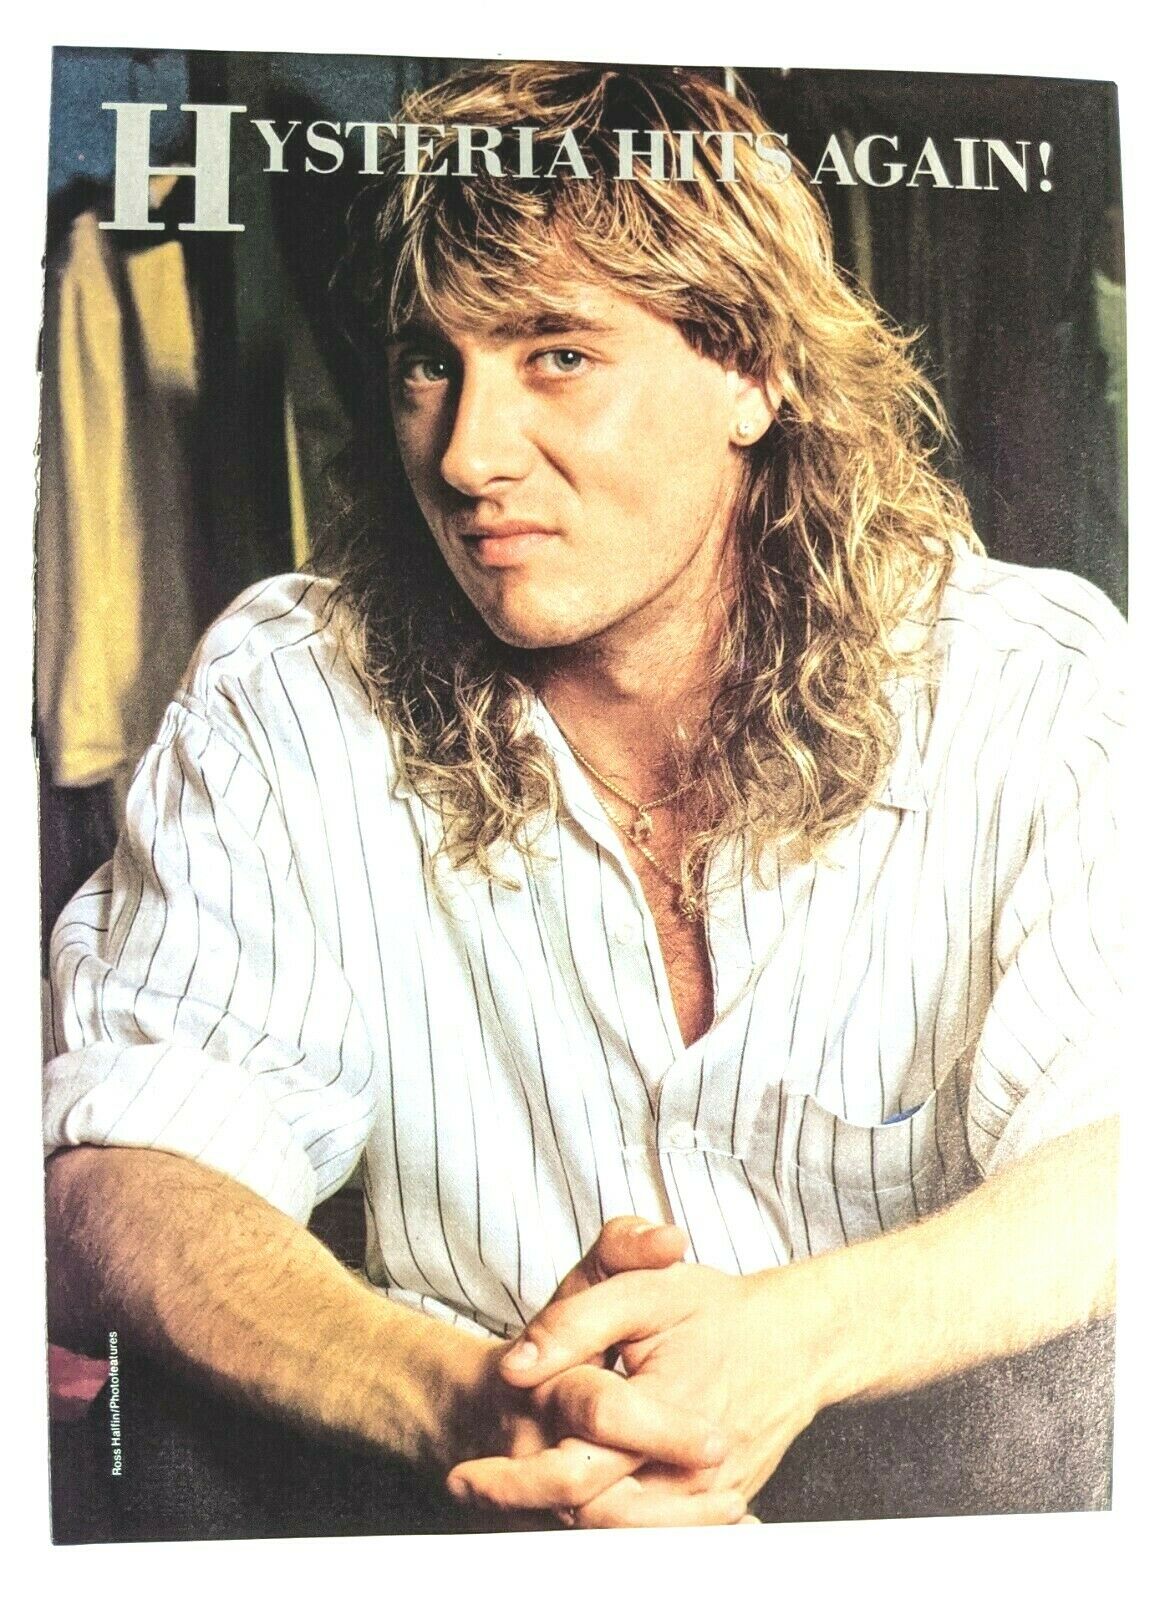 Def Leppard / Joe Elliott / Magazine Full Page Pinup Poster Clipping (5)